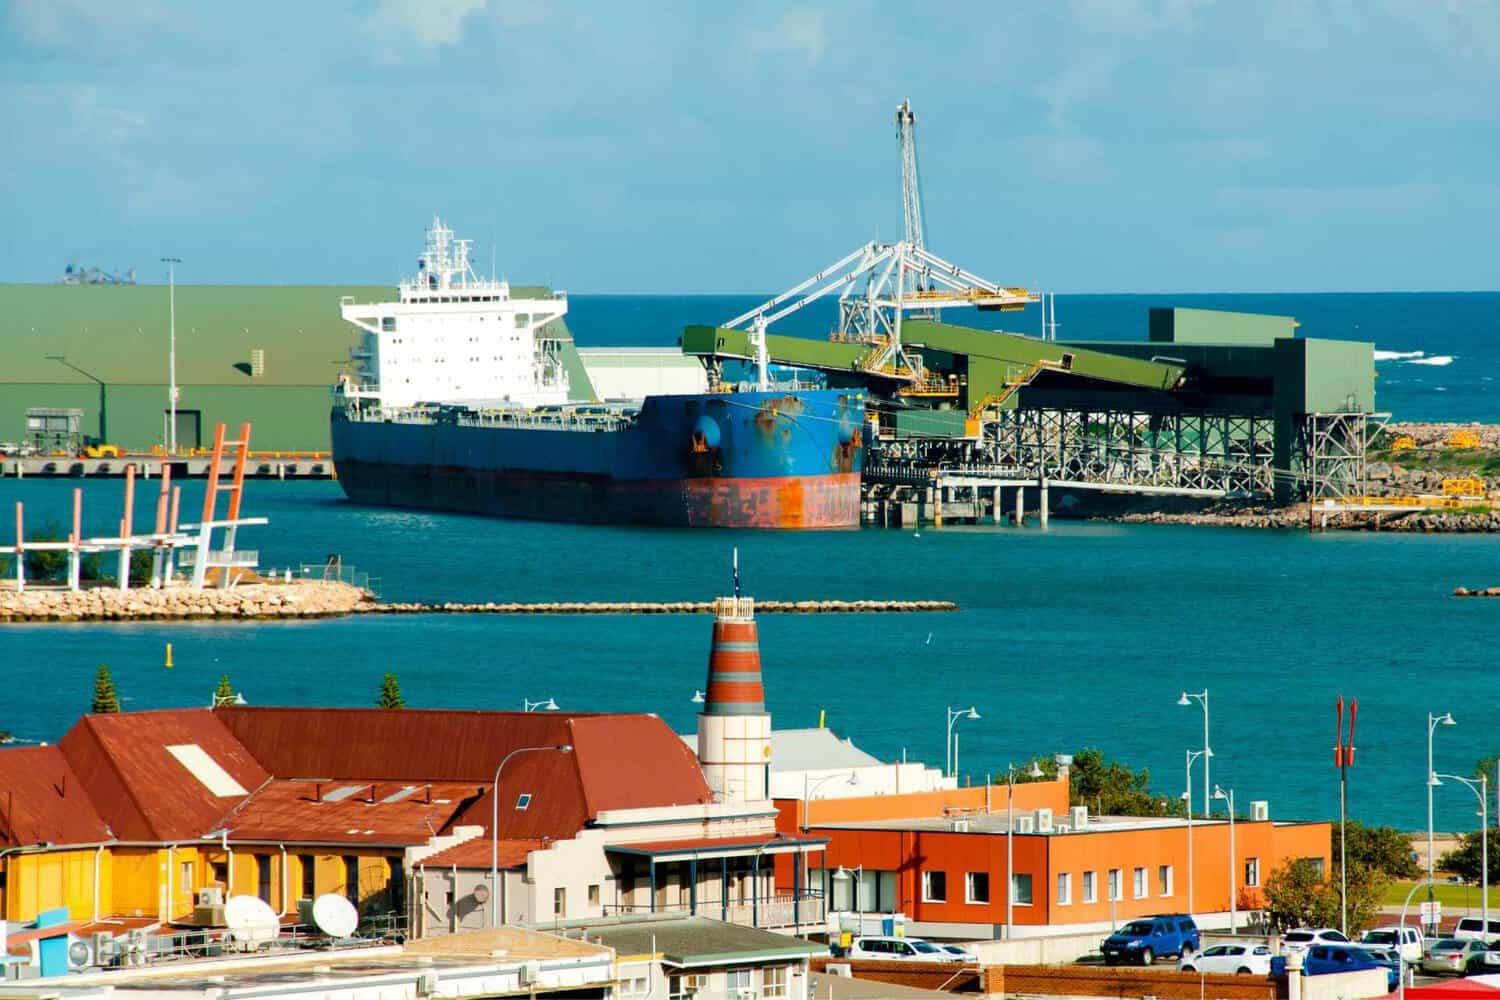 The bustling Geraldton Port with a large cargo ship docked at the iron ore loading terminal, set against a backdrop of vibrant turquoise ocean and a clear sky. 